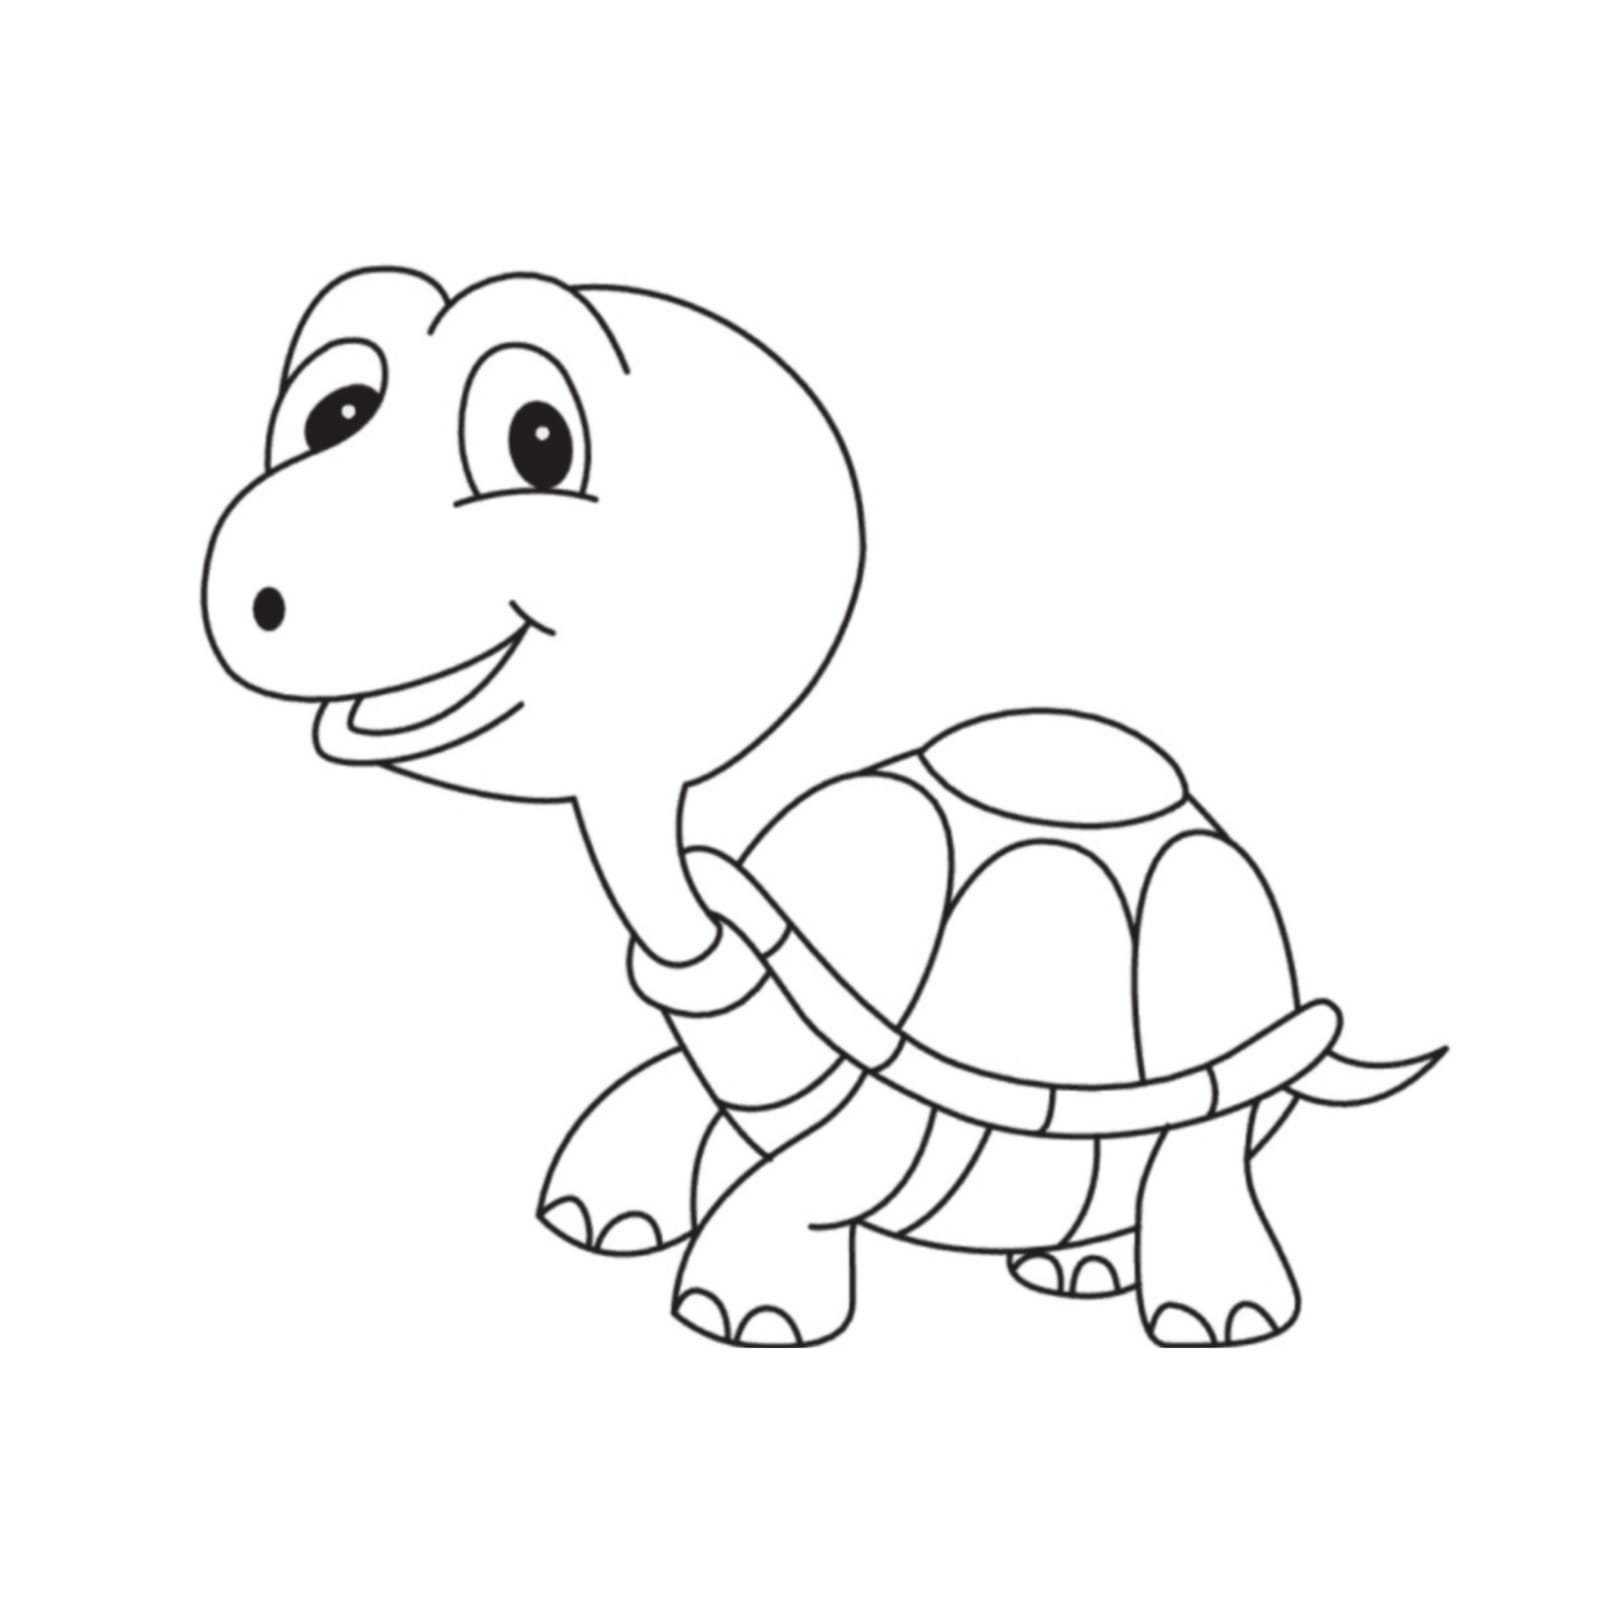 How to Draw a Cute Tortoise